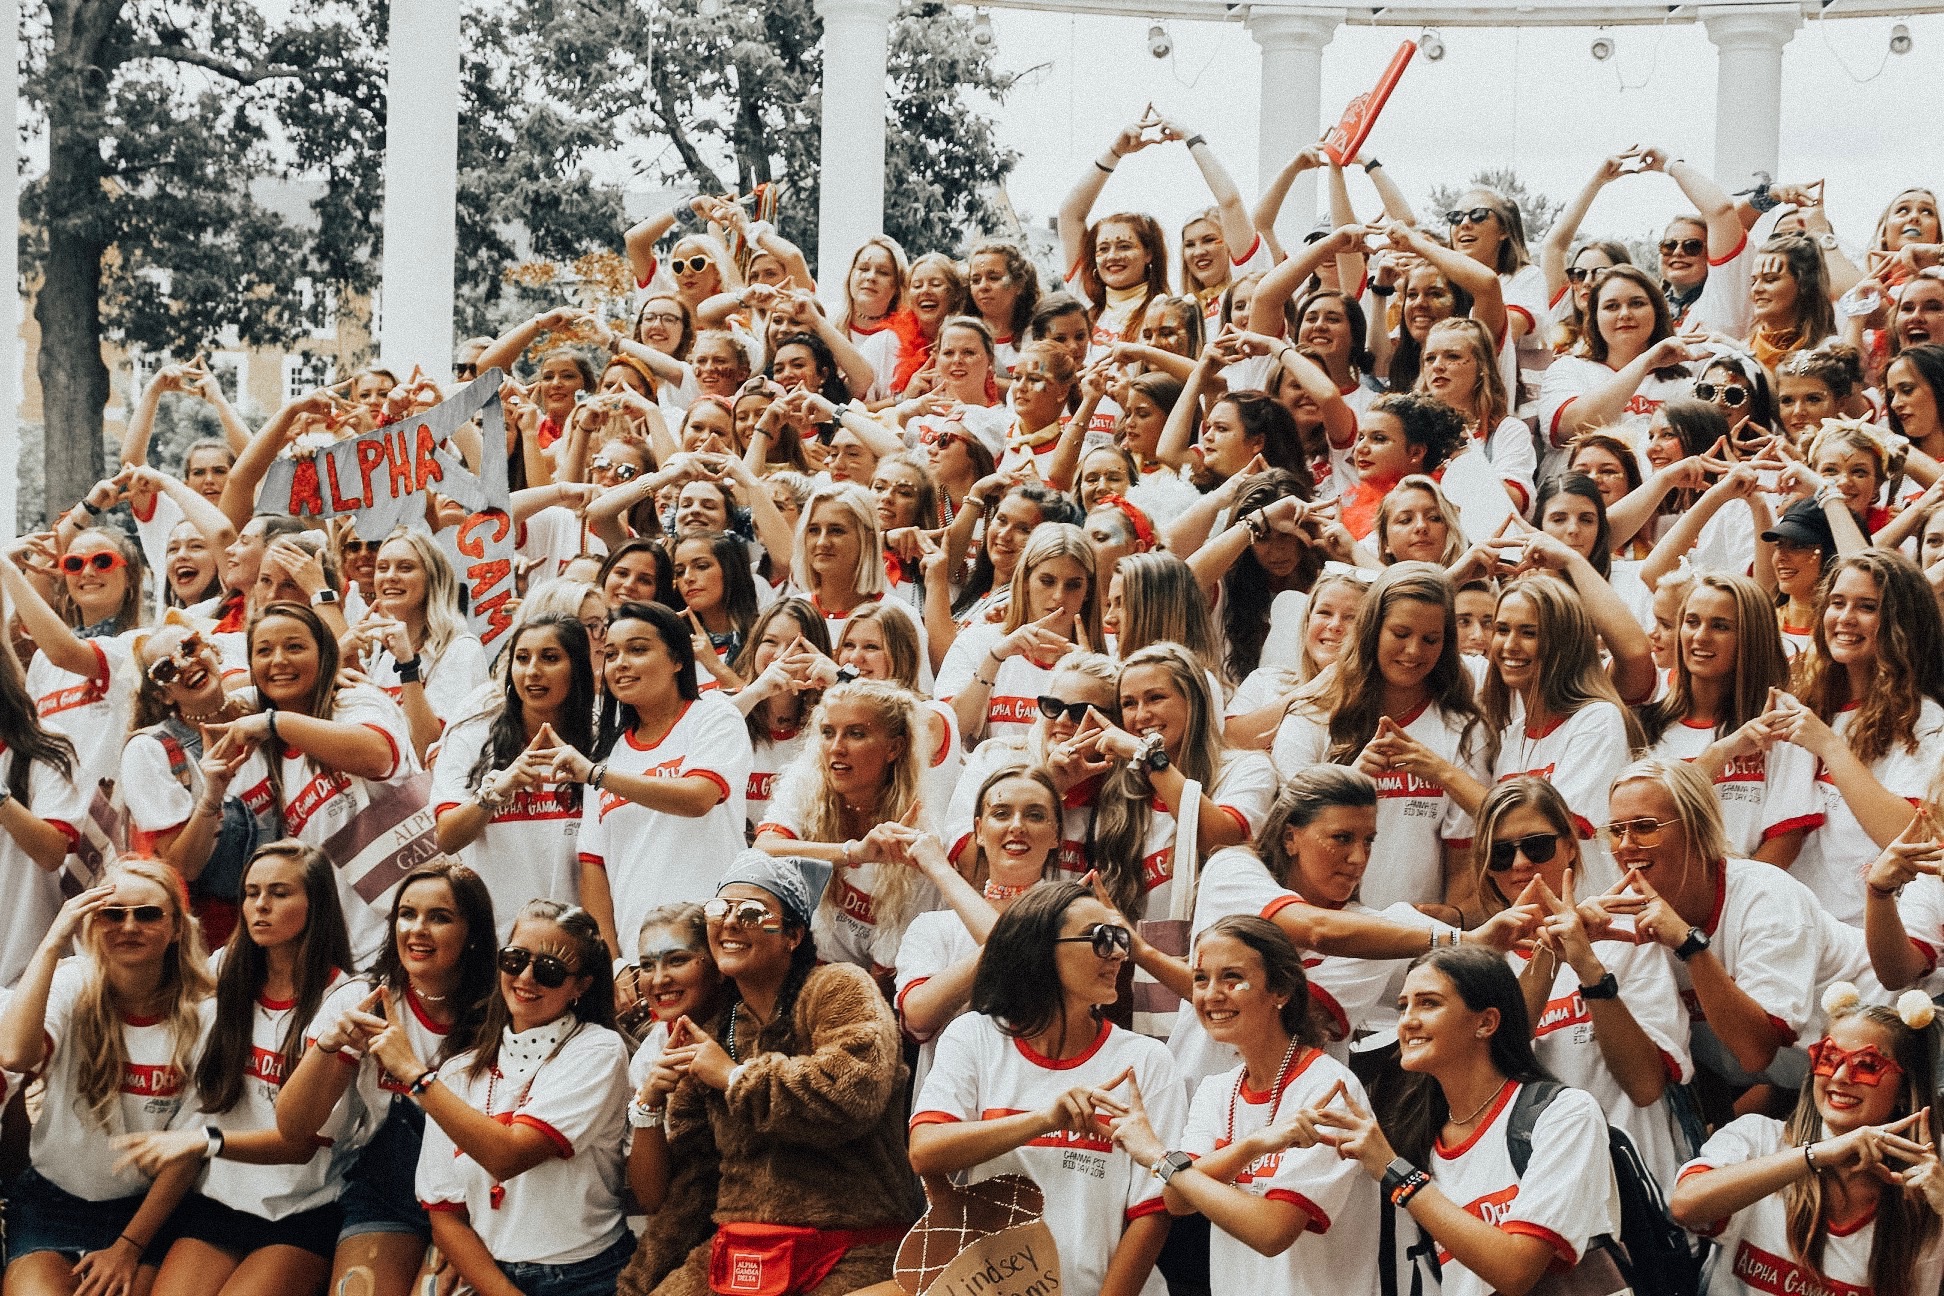 Women in white Alpha Gamma Delta shirts on bid day at the amphitheater posed holding their hands to form the sign of their sorority.